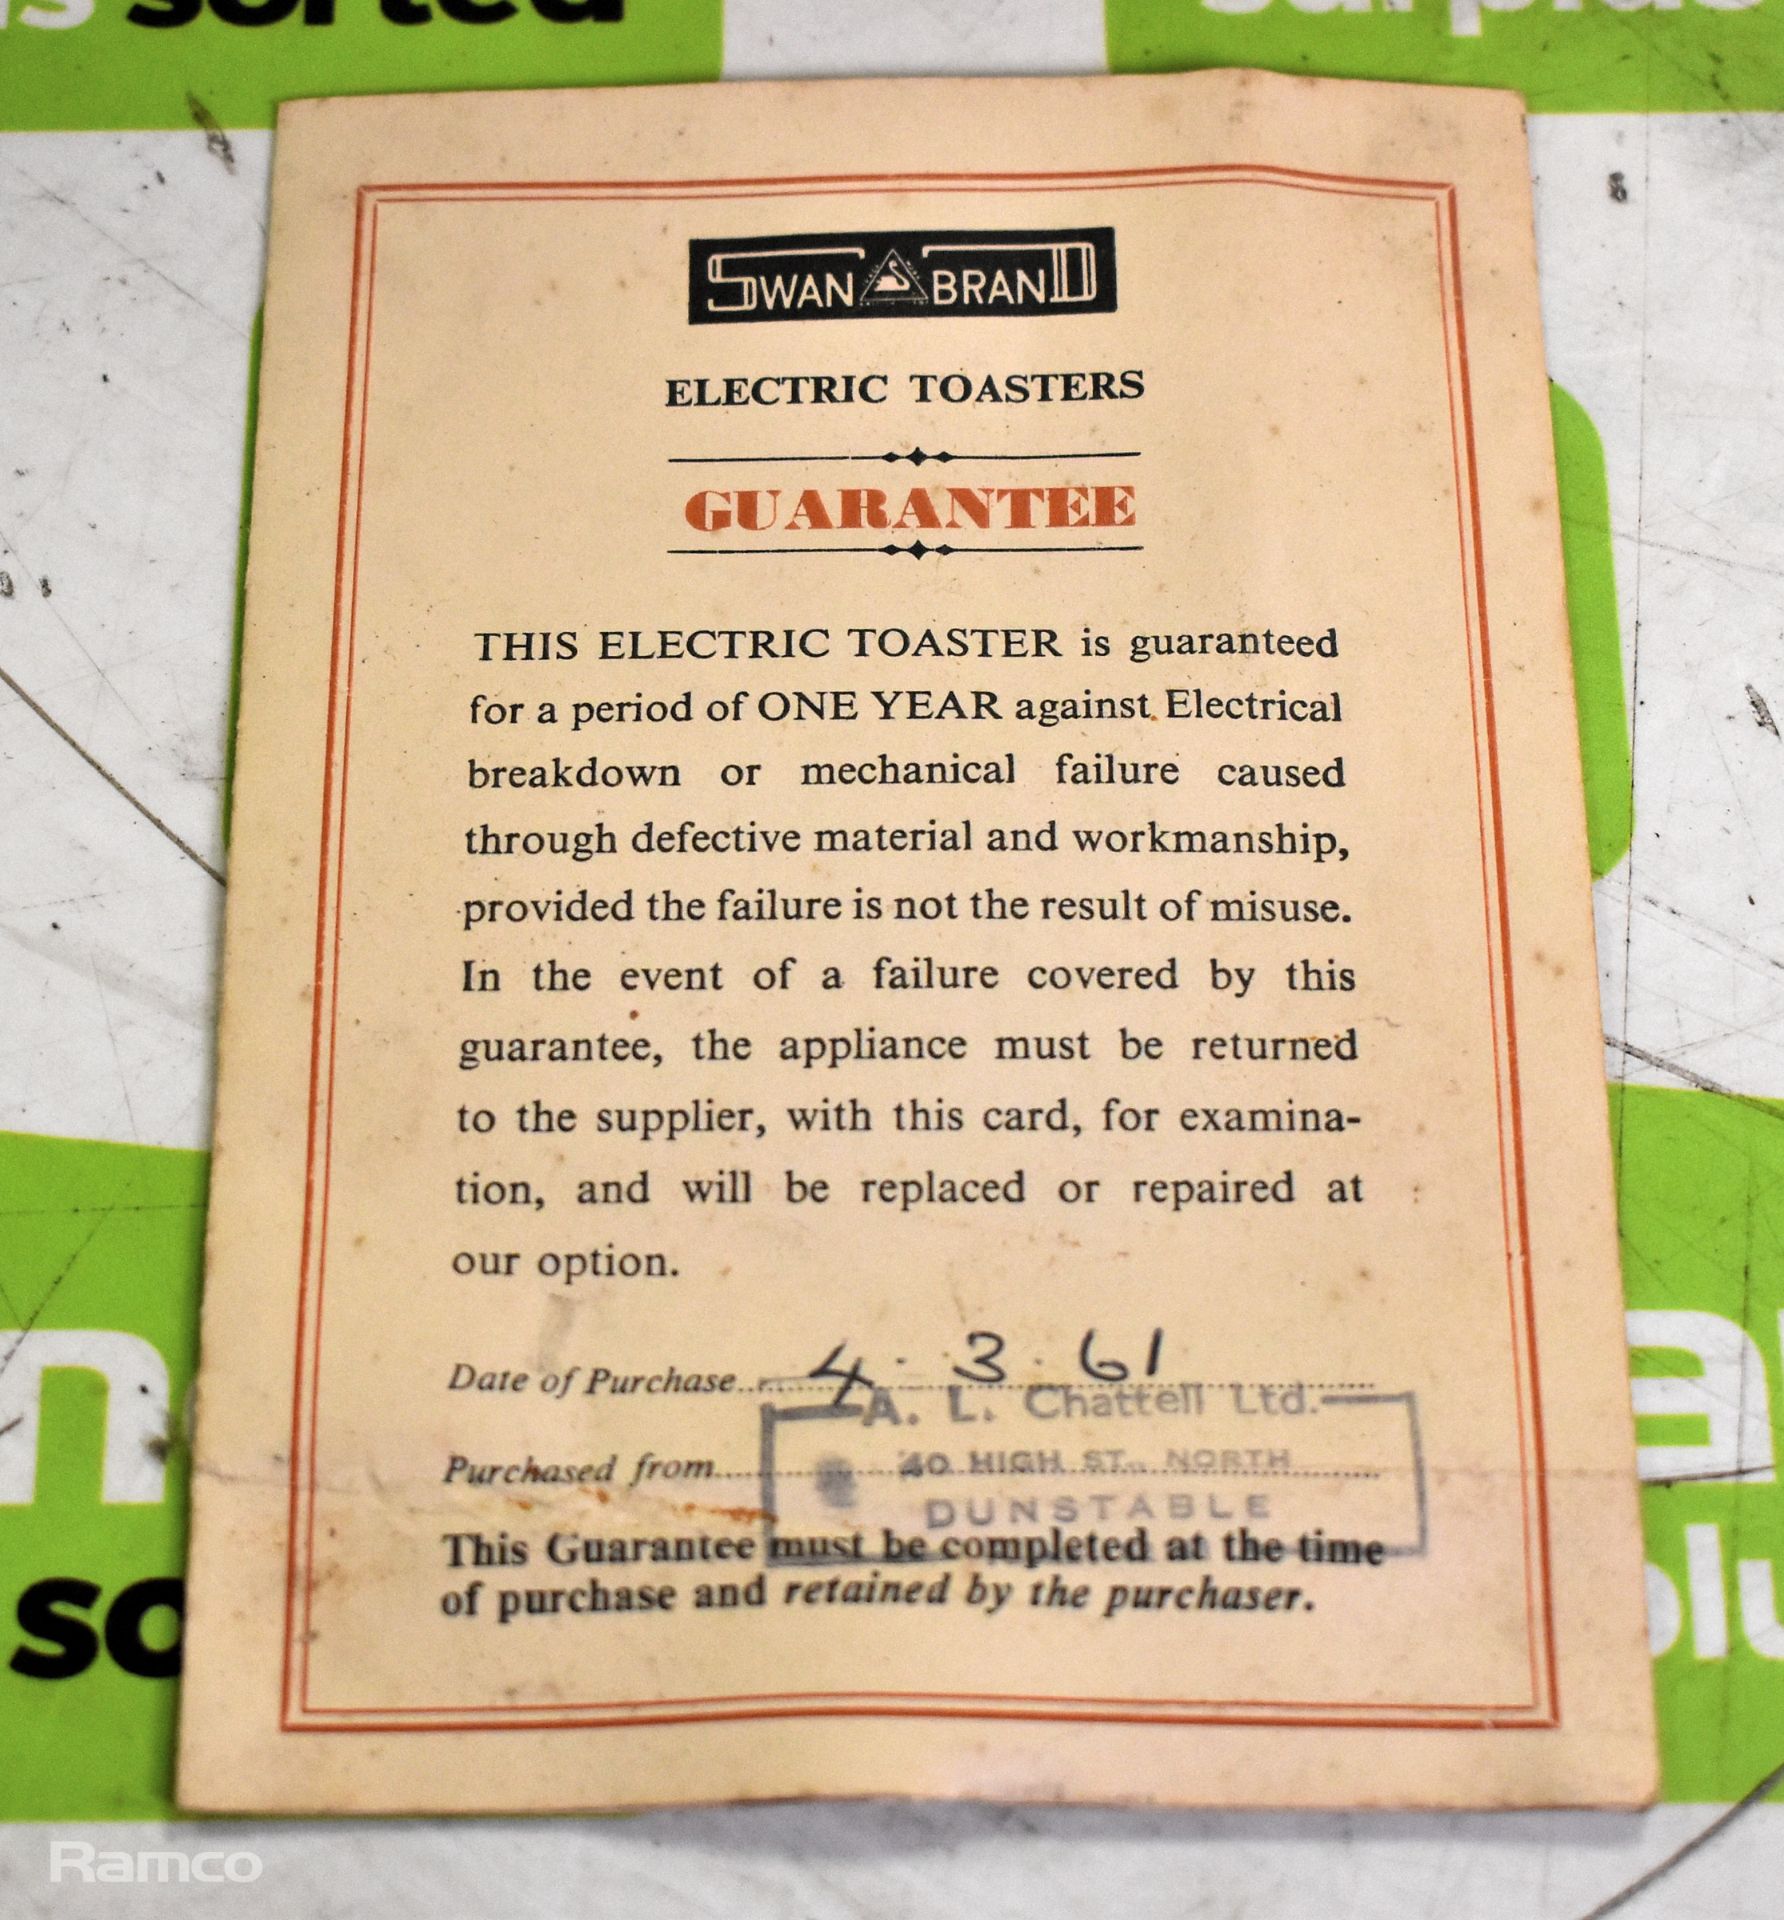 Swan Brand - The Premier Electric Toaster - cat No. 903 - Image 9 of 11